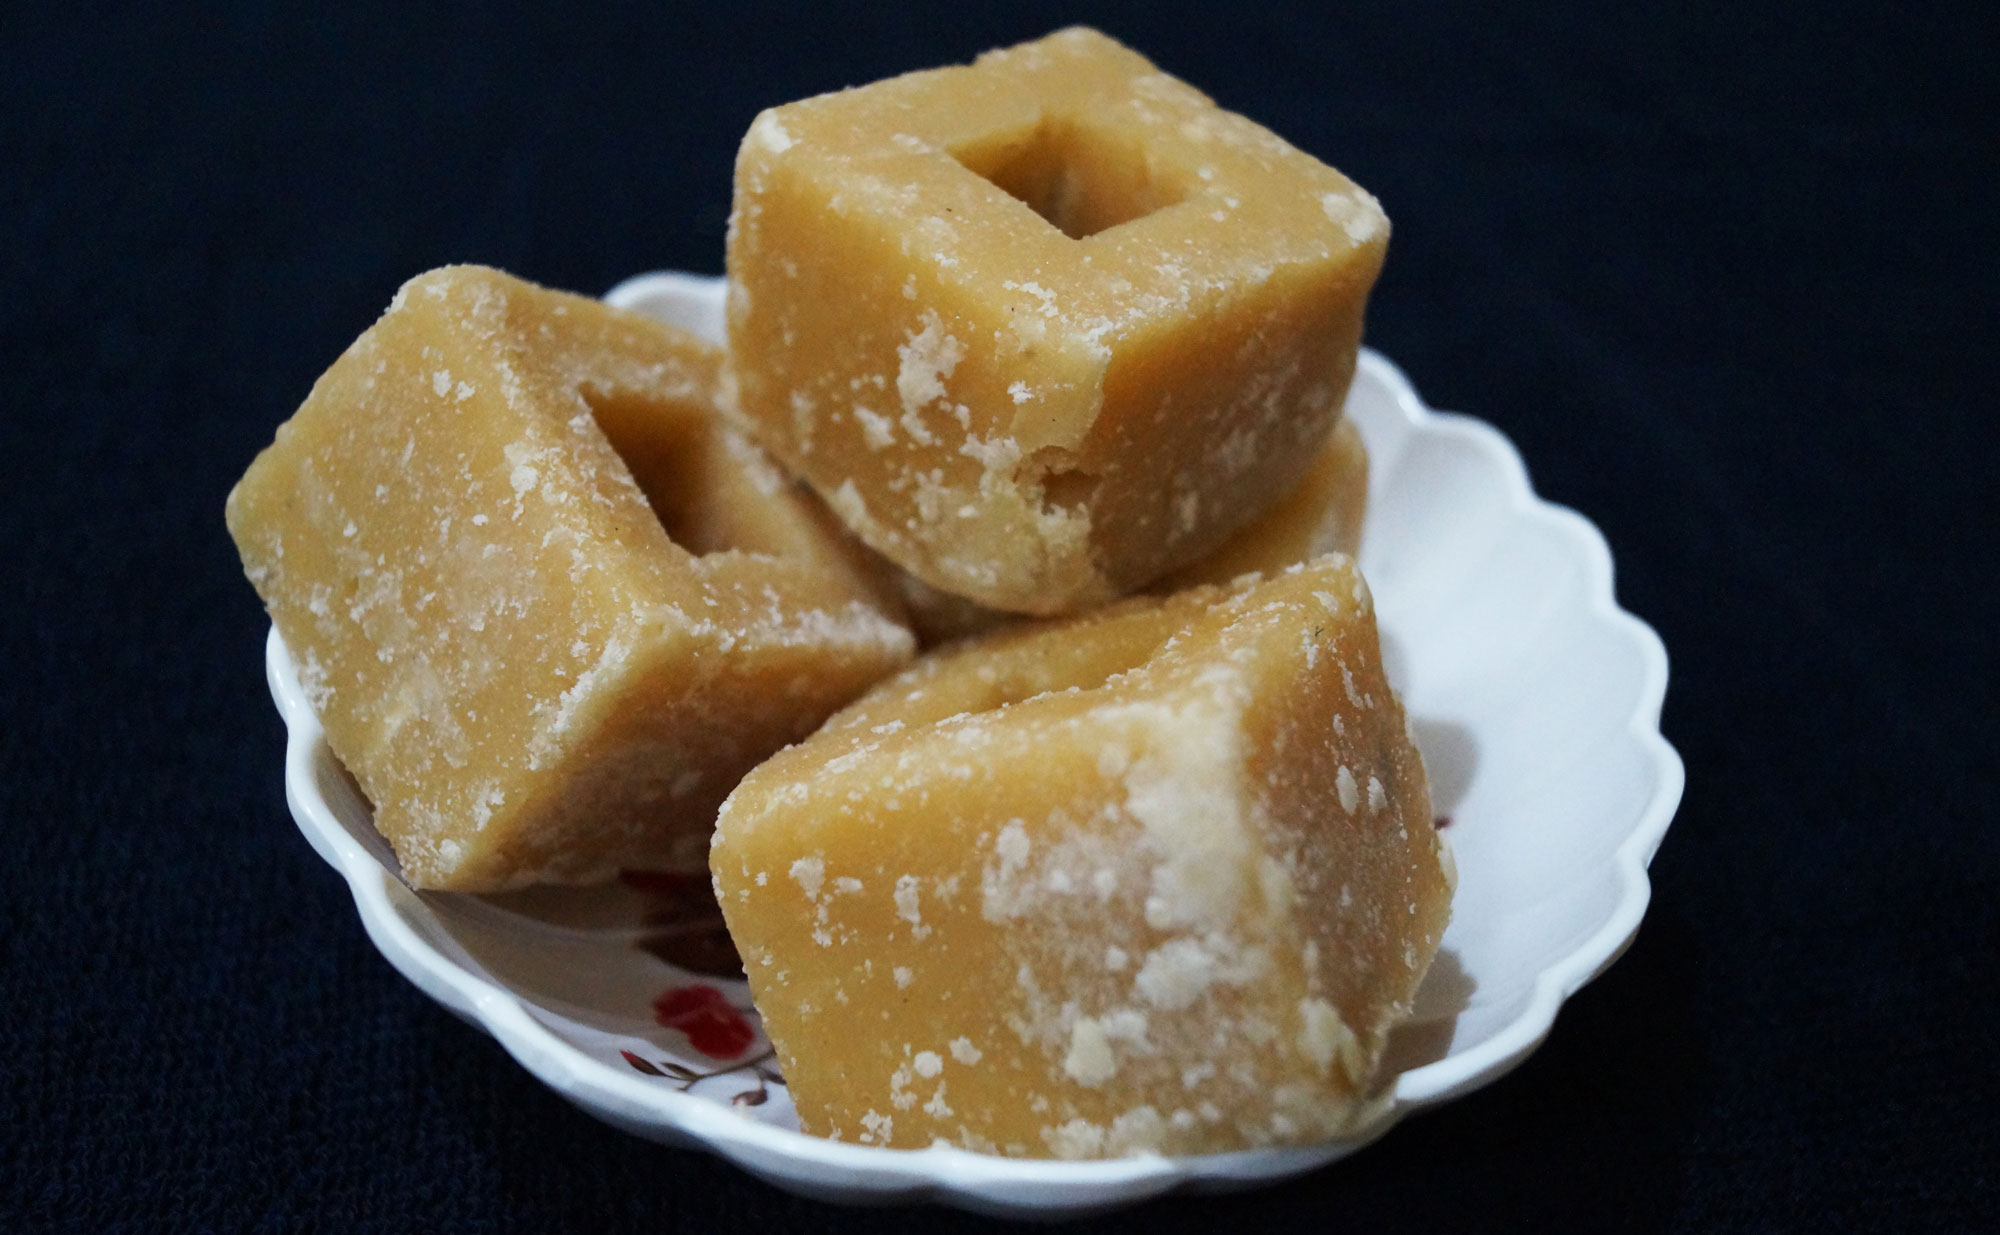 Photograph of jaggery cubes. The photo shows three caramel-colored square cubes with hollow centers sitting on a white dish with a scalloped edge.